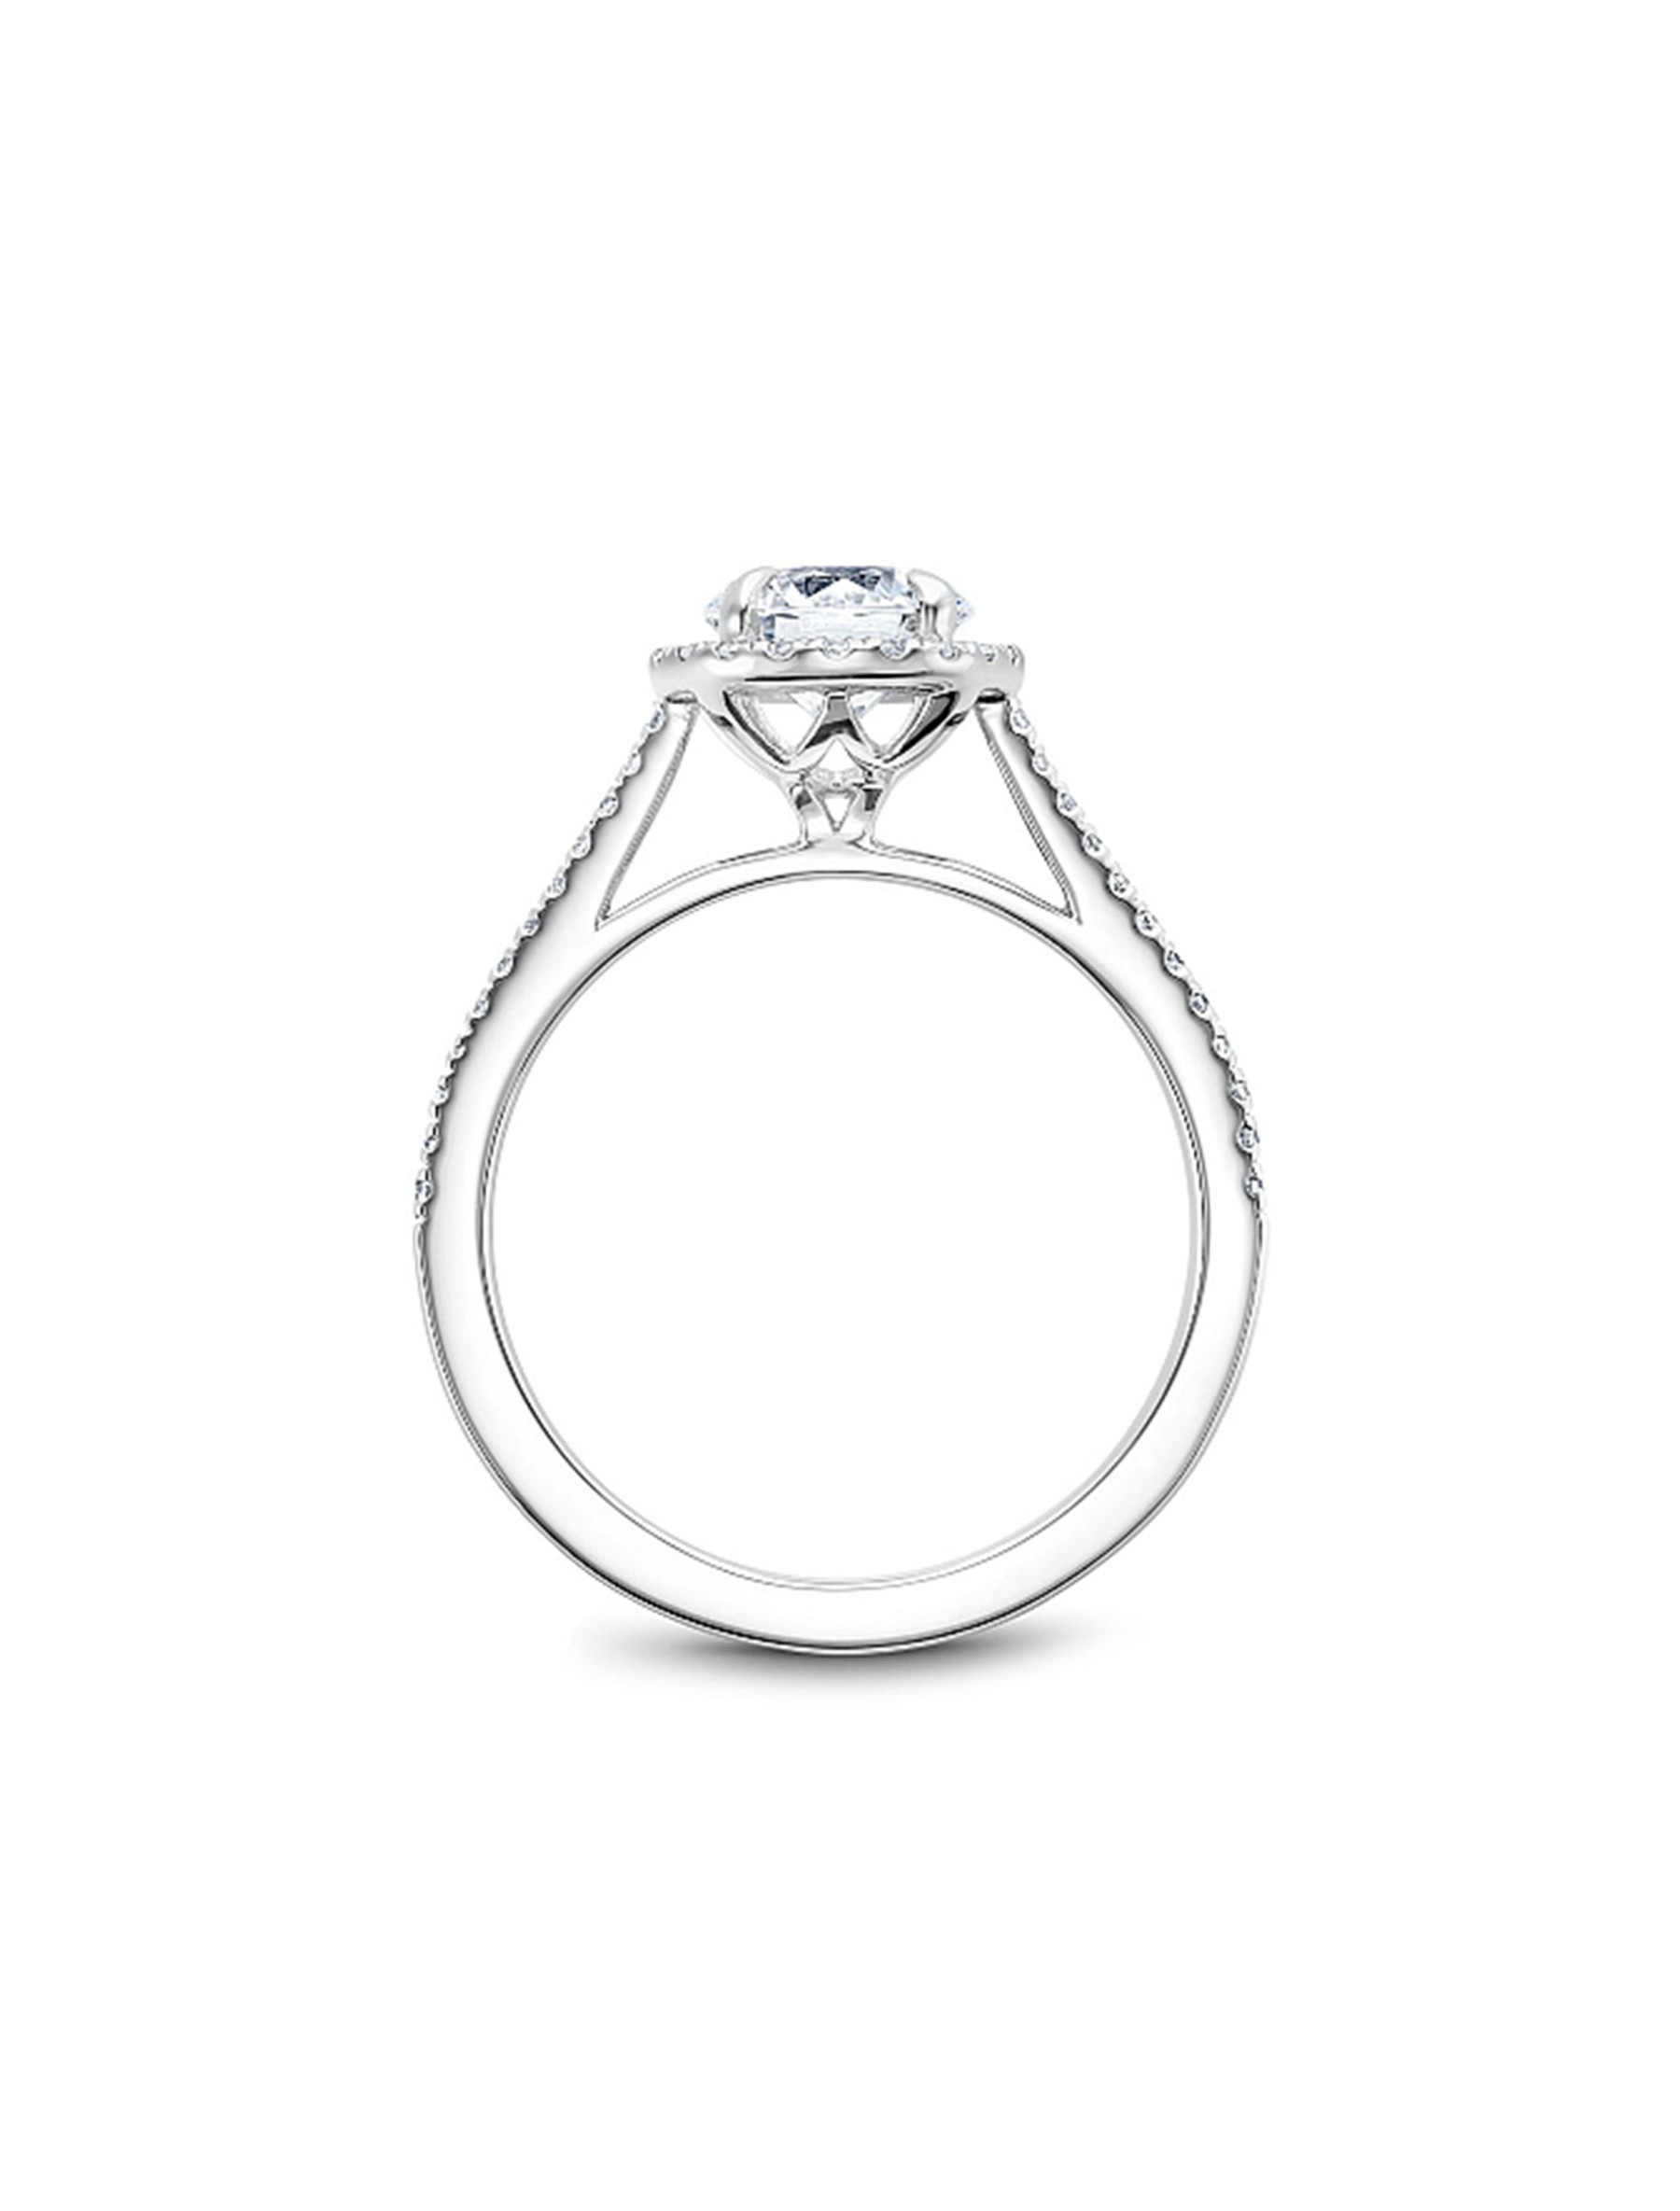 Noam Carver Round Pave Diamond Halo Engagement Ring Setting in Platinum side view